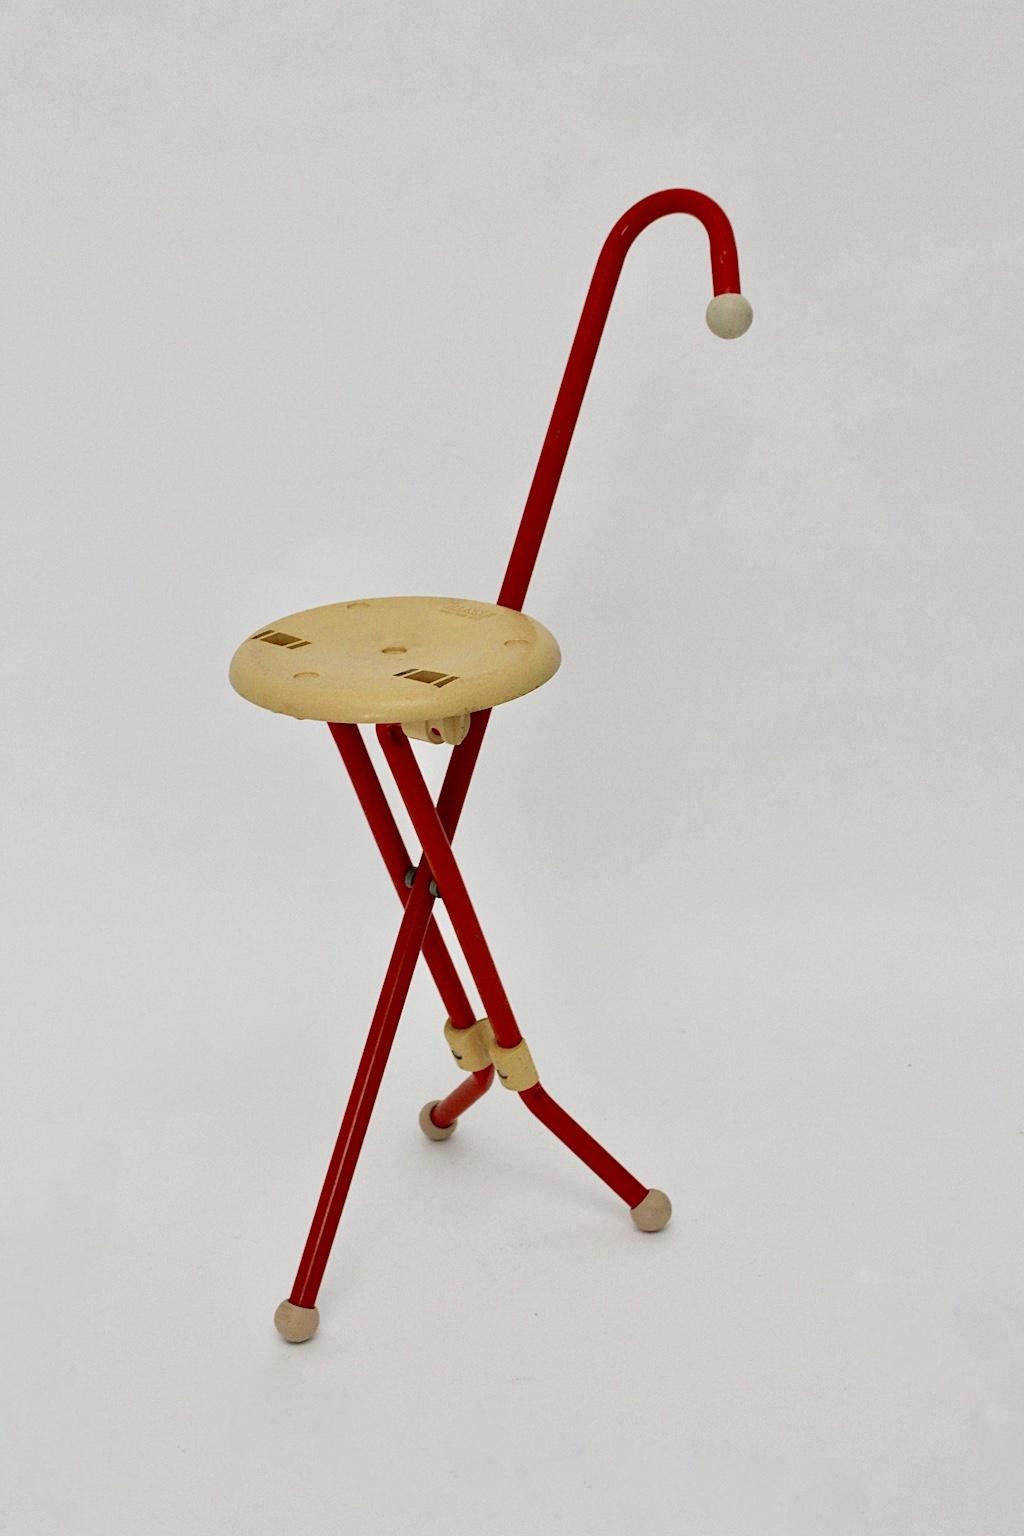 Modern vintage folding chair walking stick, which was made of red lacquered metal and light plastic seat with backrest. Designed by Ivan Loss, 1980s
The vintage condition is very good.
Approximate measures:
Diameter 22 cm
Height 73 cm
Seat height 48